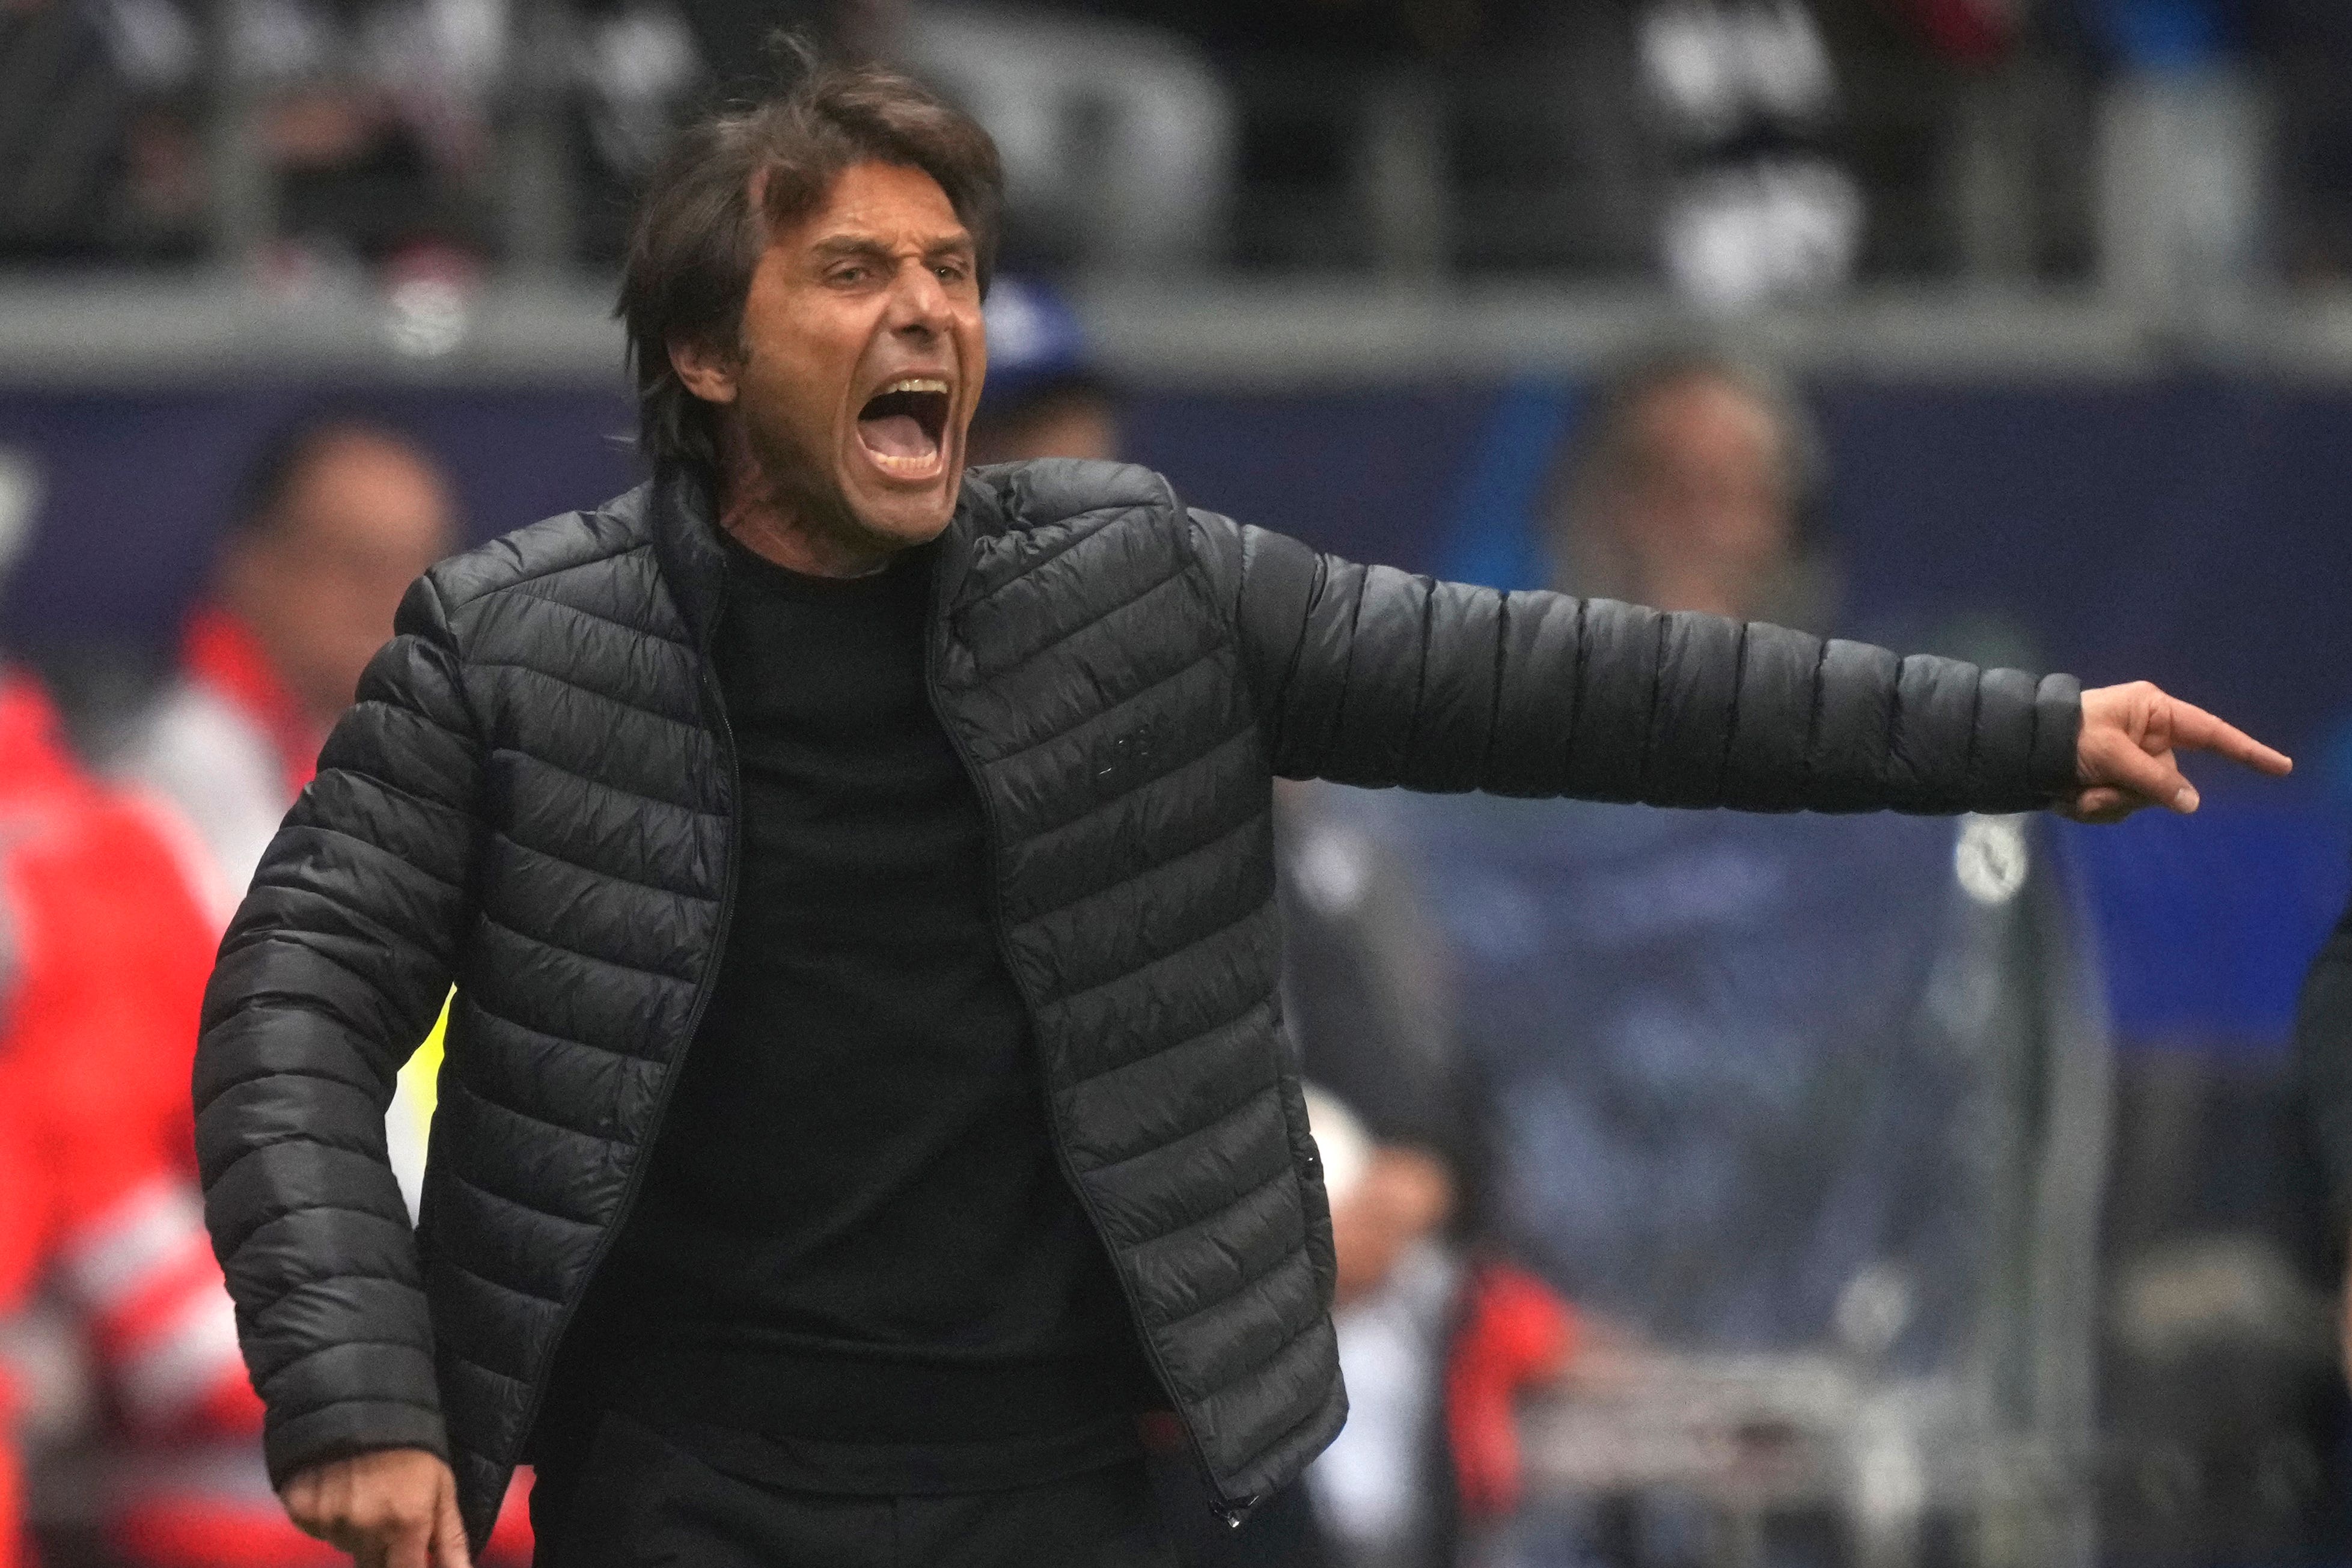 Antonio Conte watched Tottenham held to a 0-0 draw at Frankfurt (Michael Probst/AP/PA)